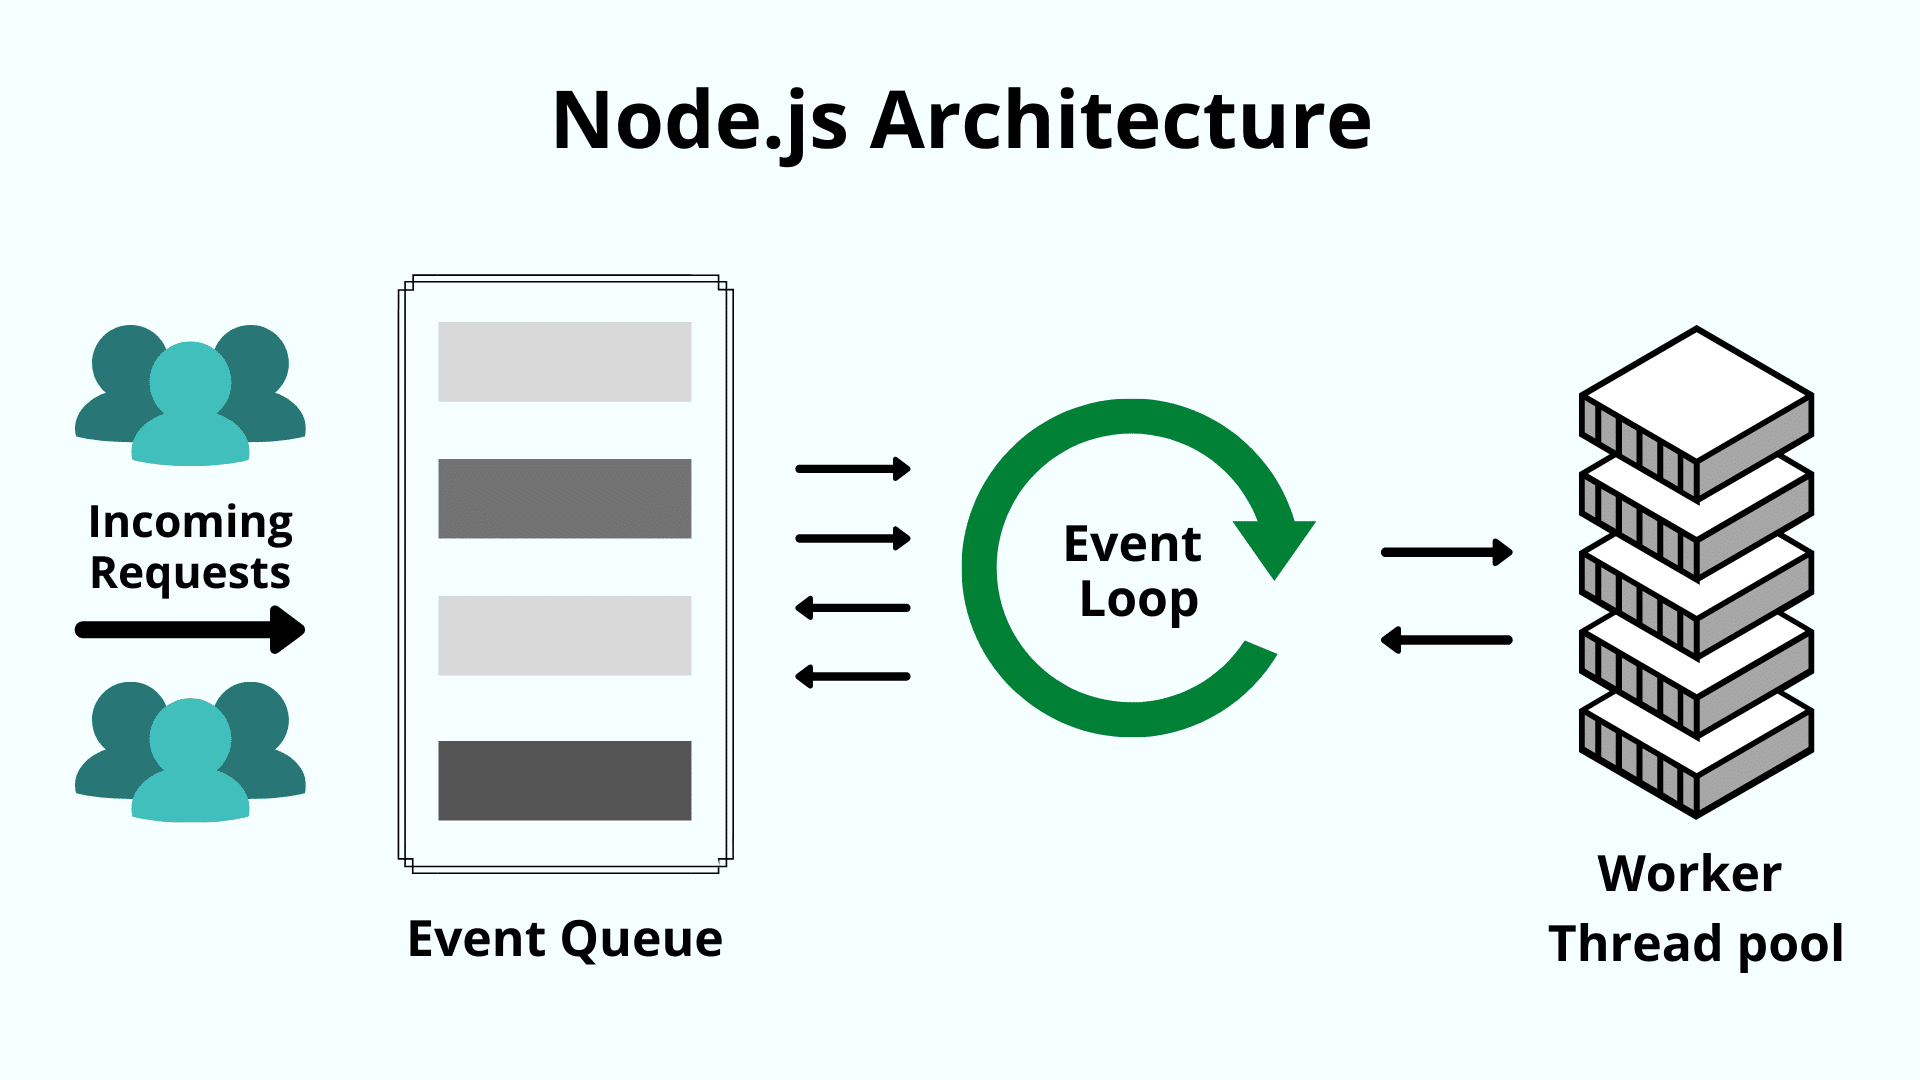 Node.js use a single-threaded event loop architecture.